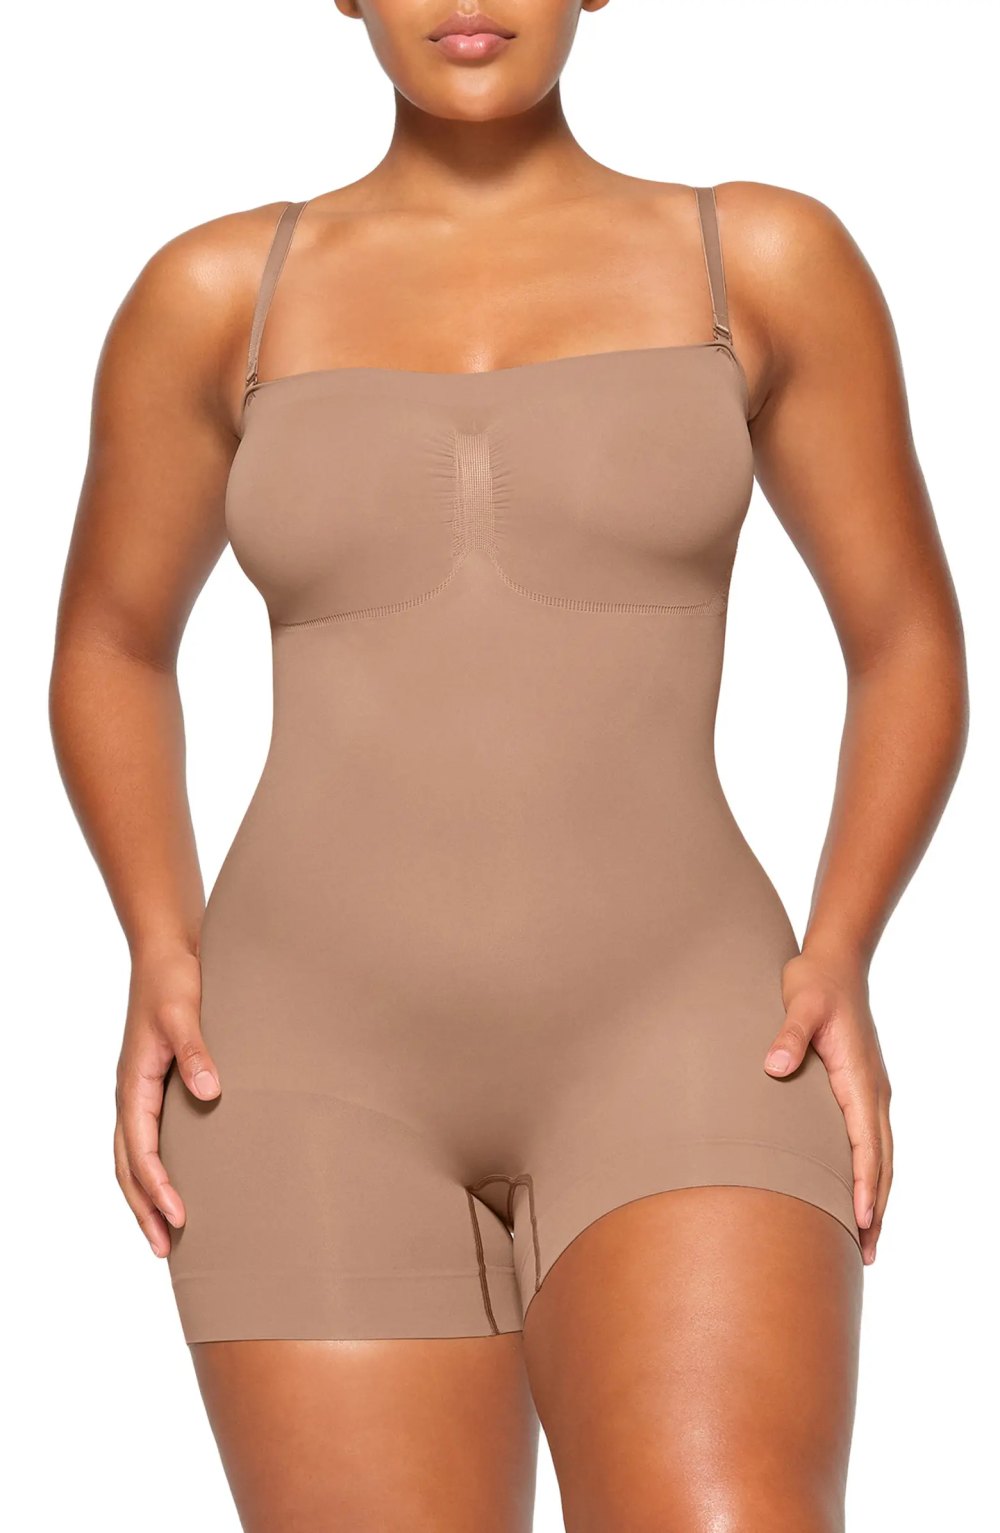 Find Cheap, Fashionable and Slimming shapewear for bodycon dress 